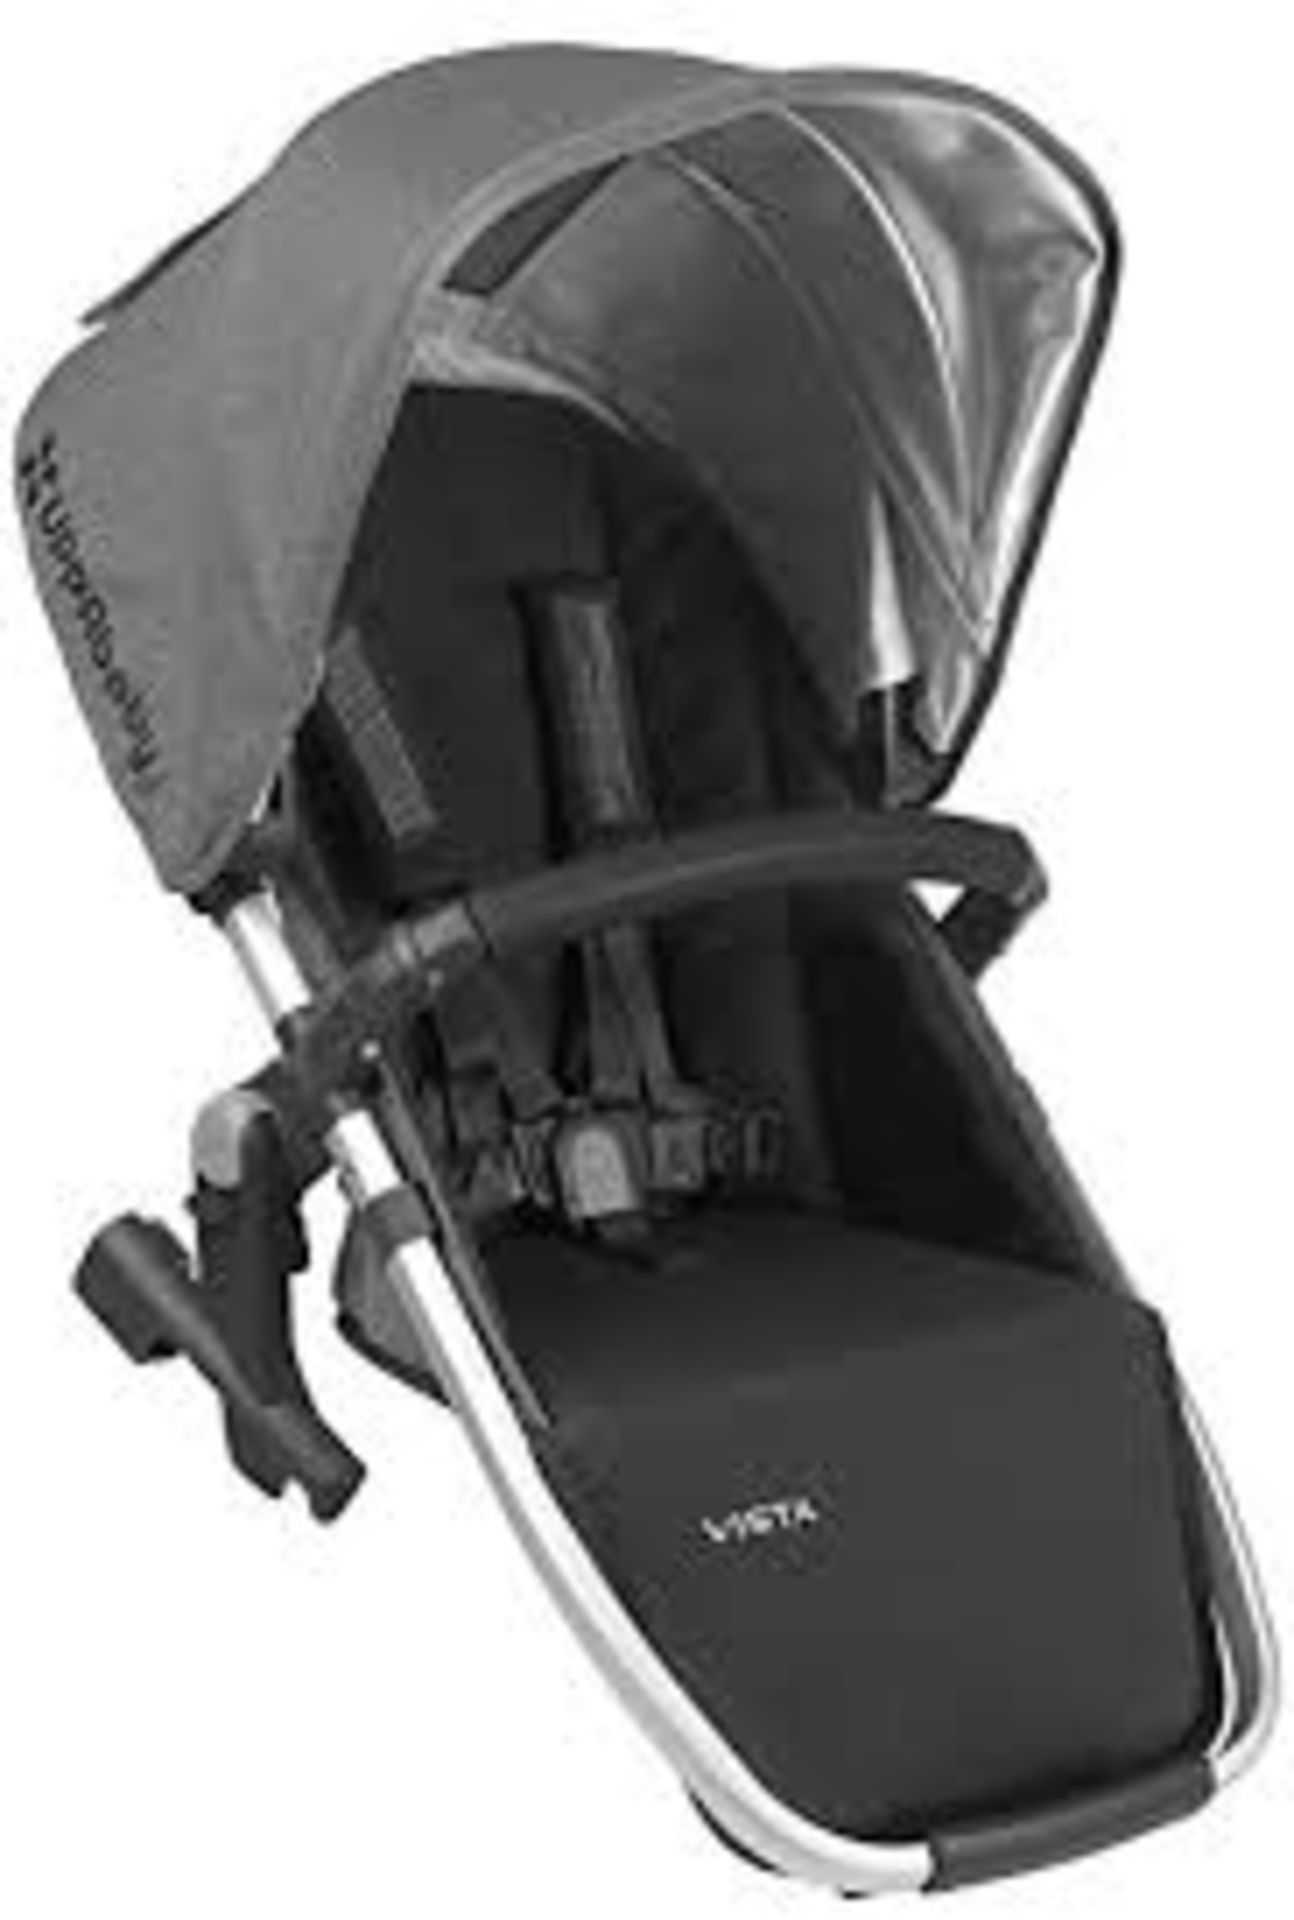 Boxed UppaBaby Rumble Seat Pram Adapter Pack RRP £250.00 (Public Viewing and Appraisals Available)